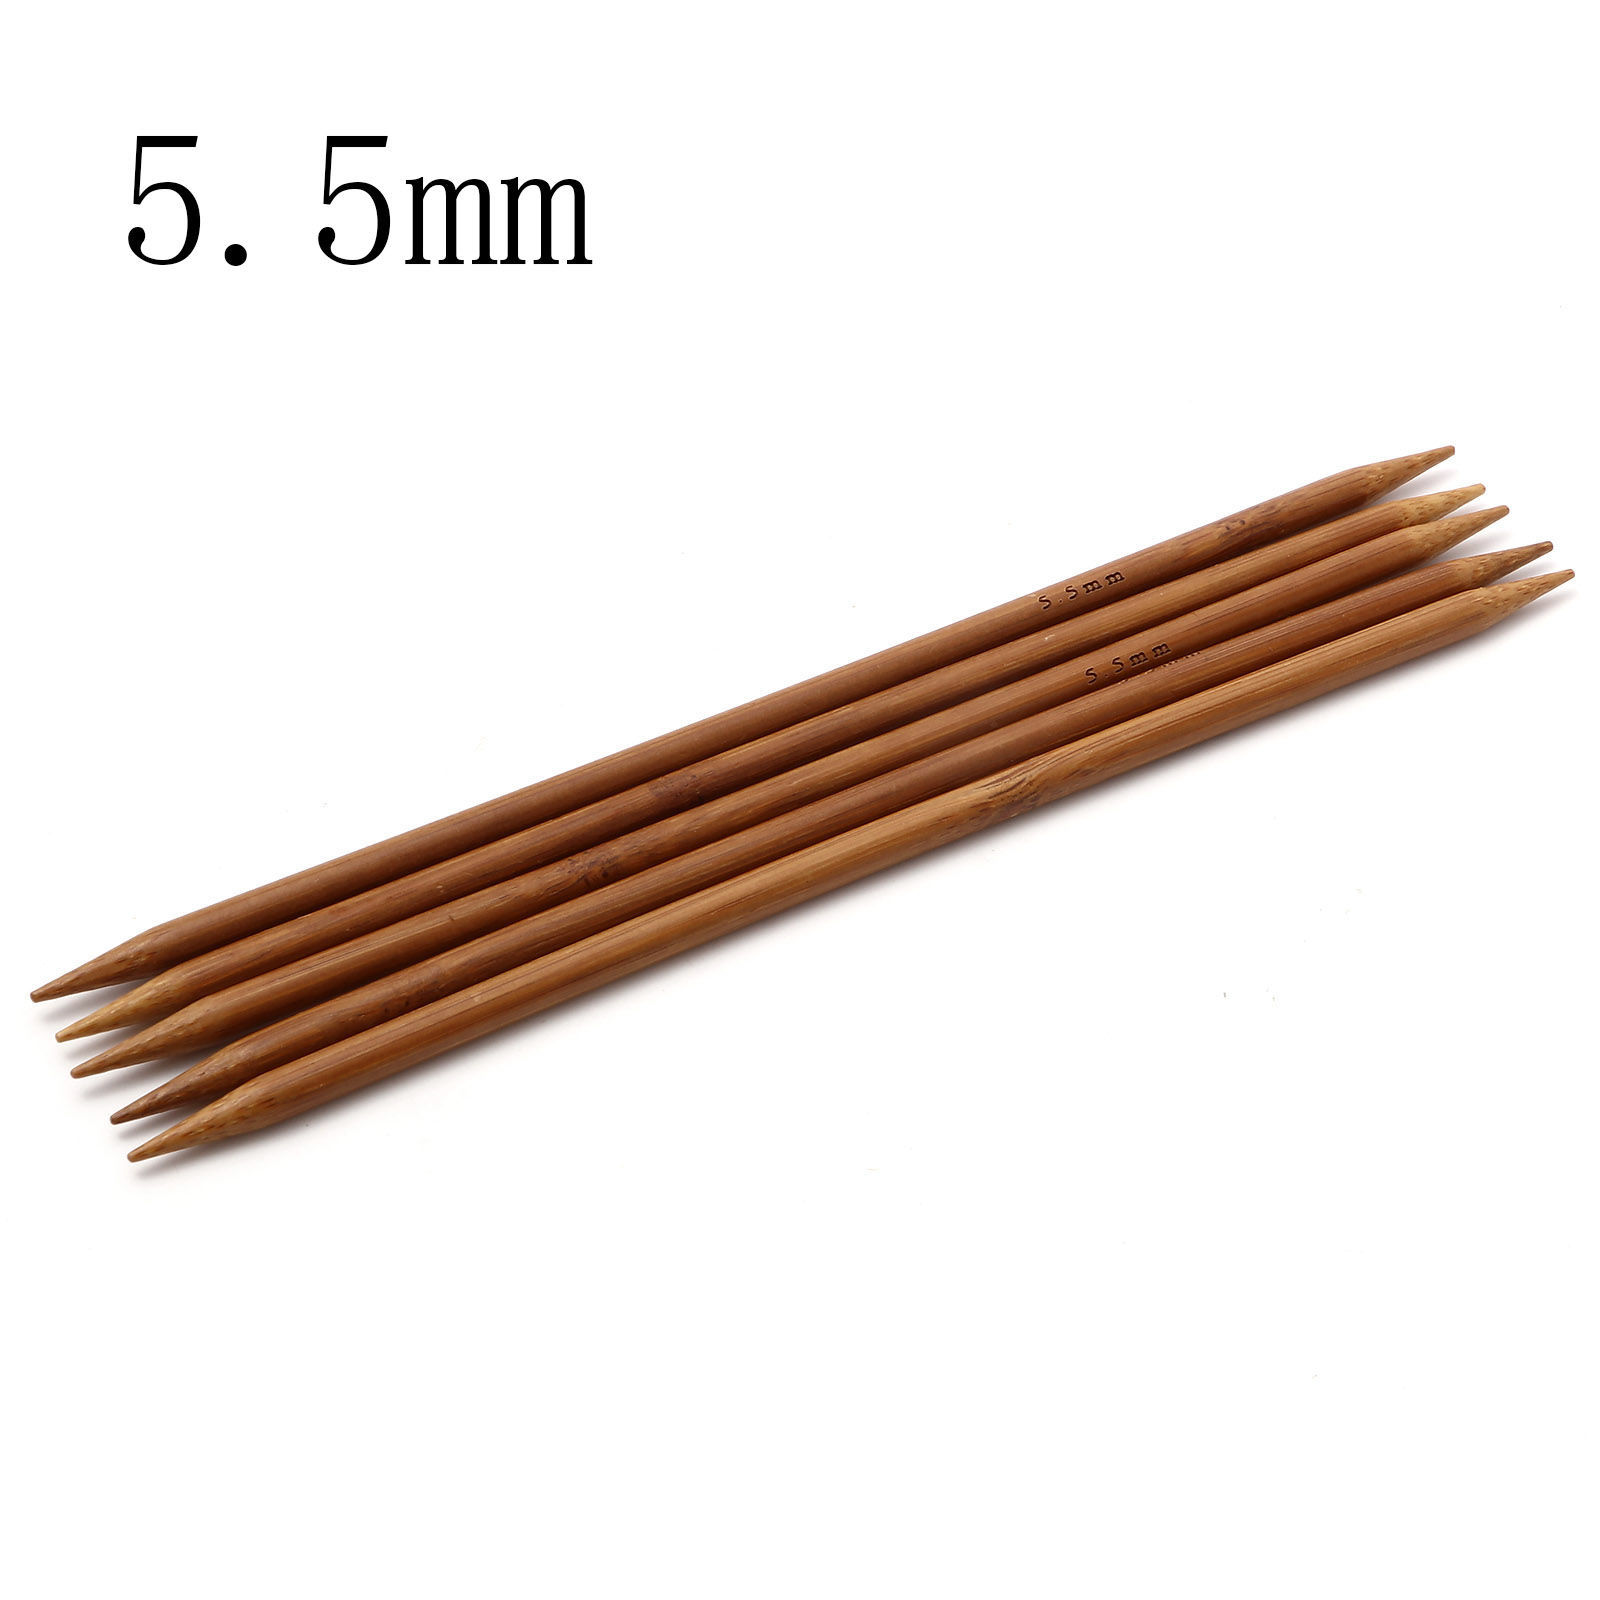 Picture of (US9 5.5mm) Bamboo Double Pointed Knitting Needles Brown 20cm(7 7/8") long, 5 PCs